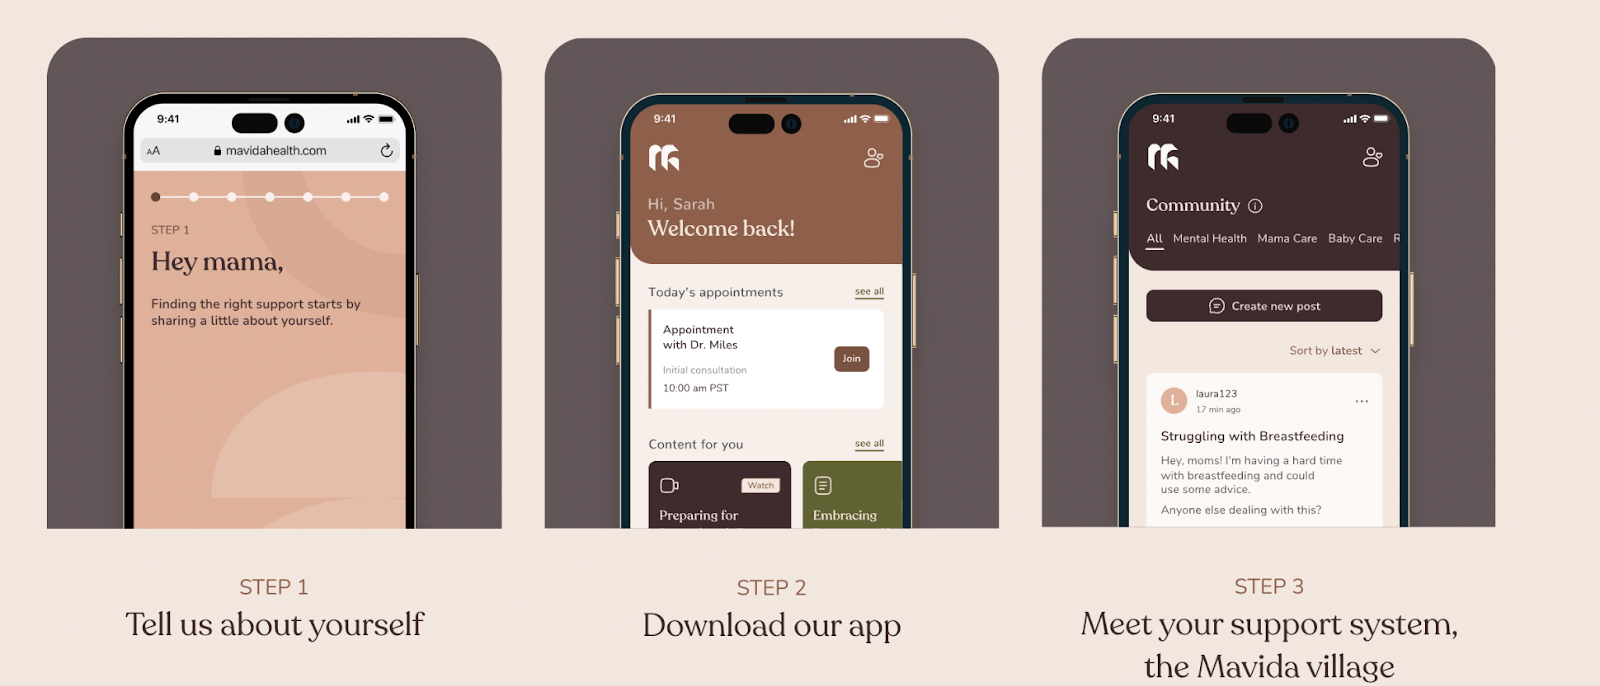 Three smartphone screens showing: step 1: tell us about yourself, step 2: download the app, step 3: meet your support system, the Mavida village.